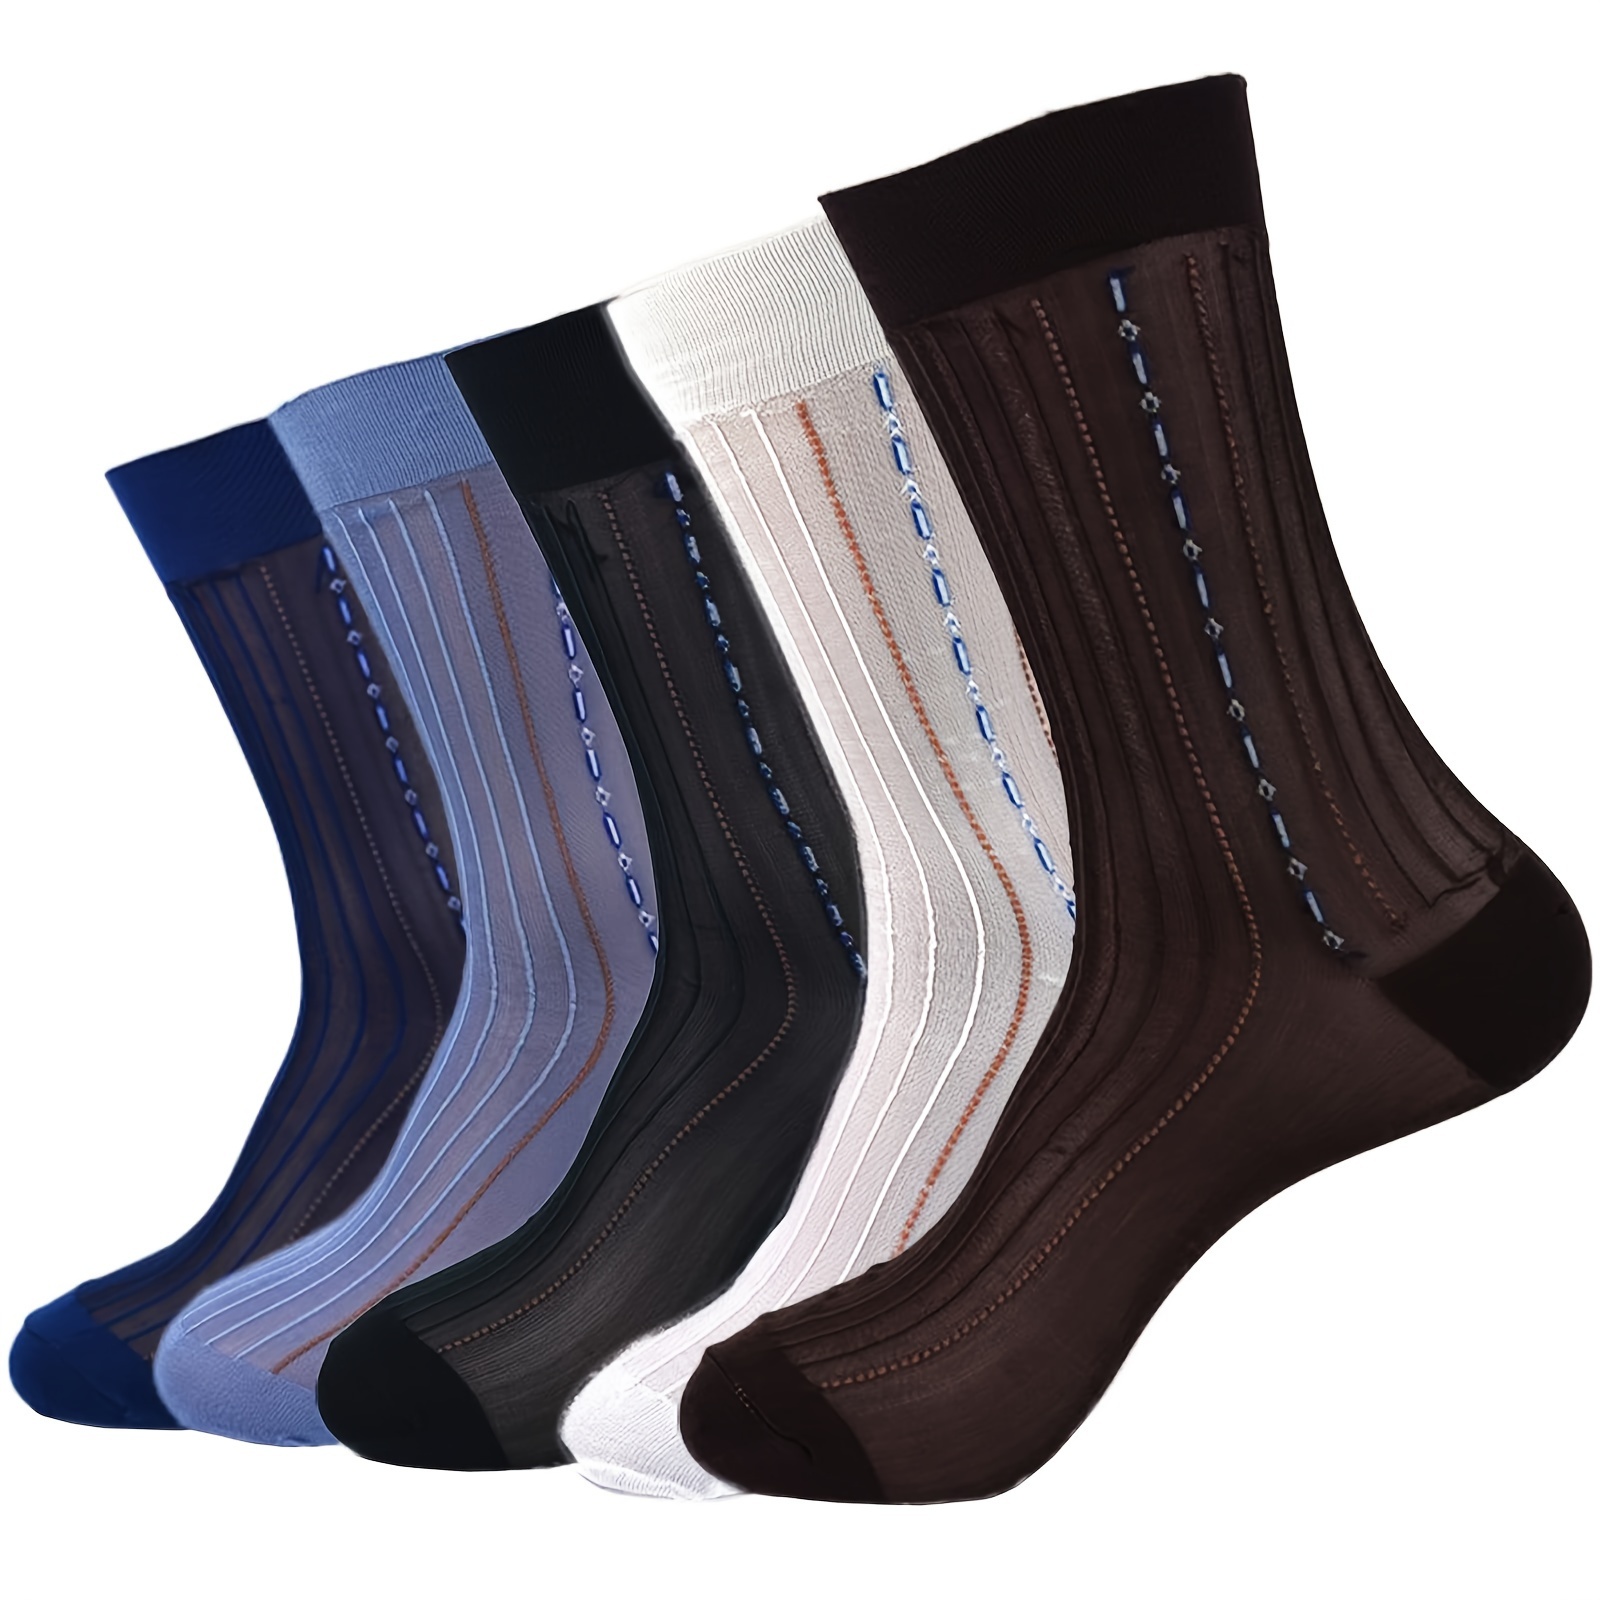 

5 Pairs Of Men's Solid Colour Ultra Thin & Mesh Crew Socks, Comfy Breathable Casual Soft & Elastic Socks, Spring & Summer